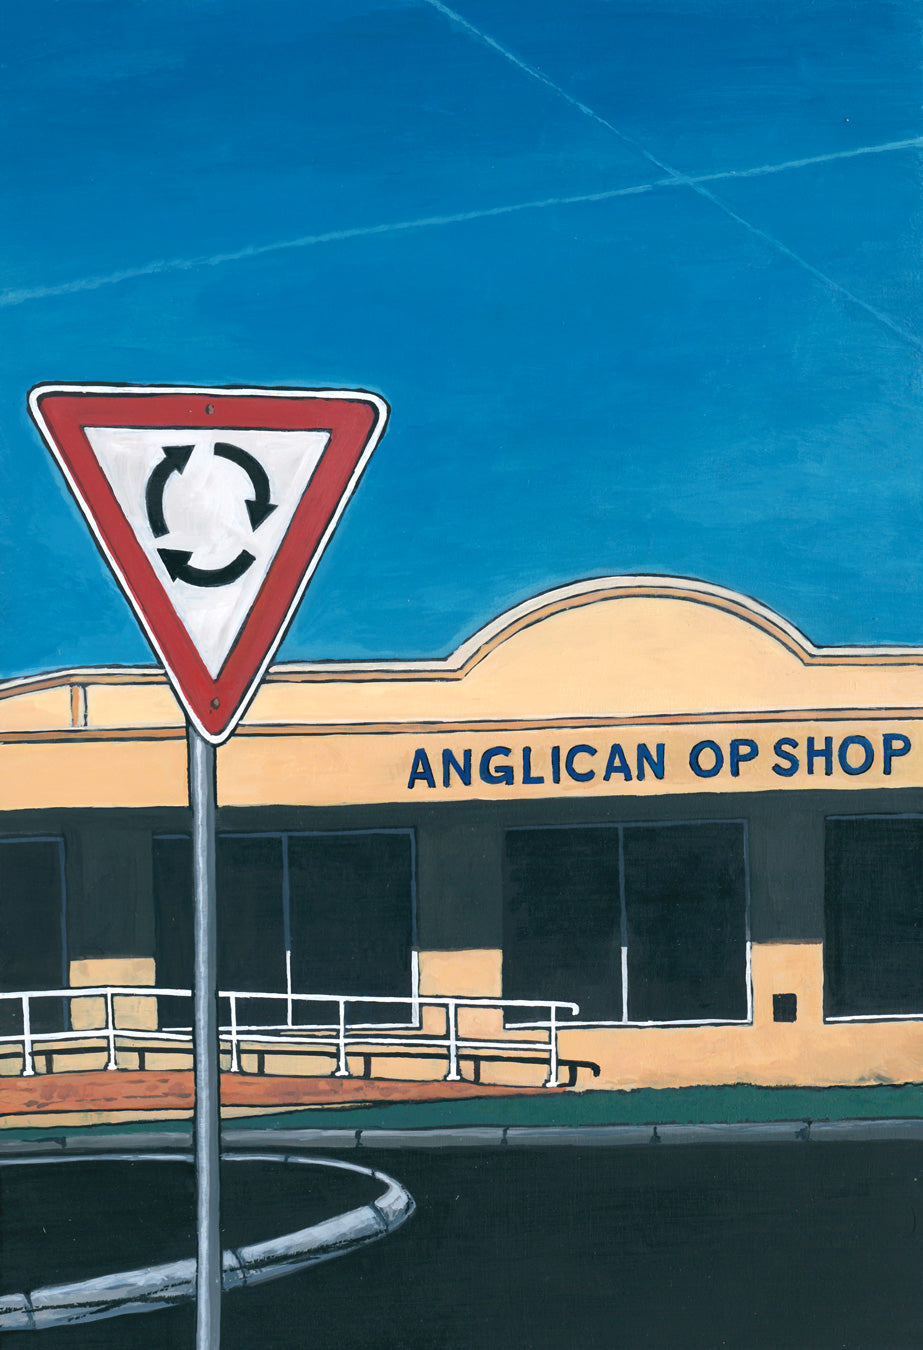 Josh Galletly Artwork. Painting of the Anglican Op Shop in Ballina, NSW Australia